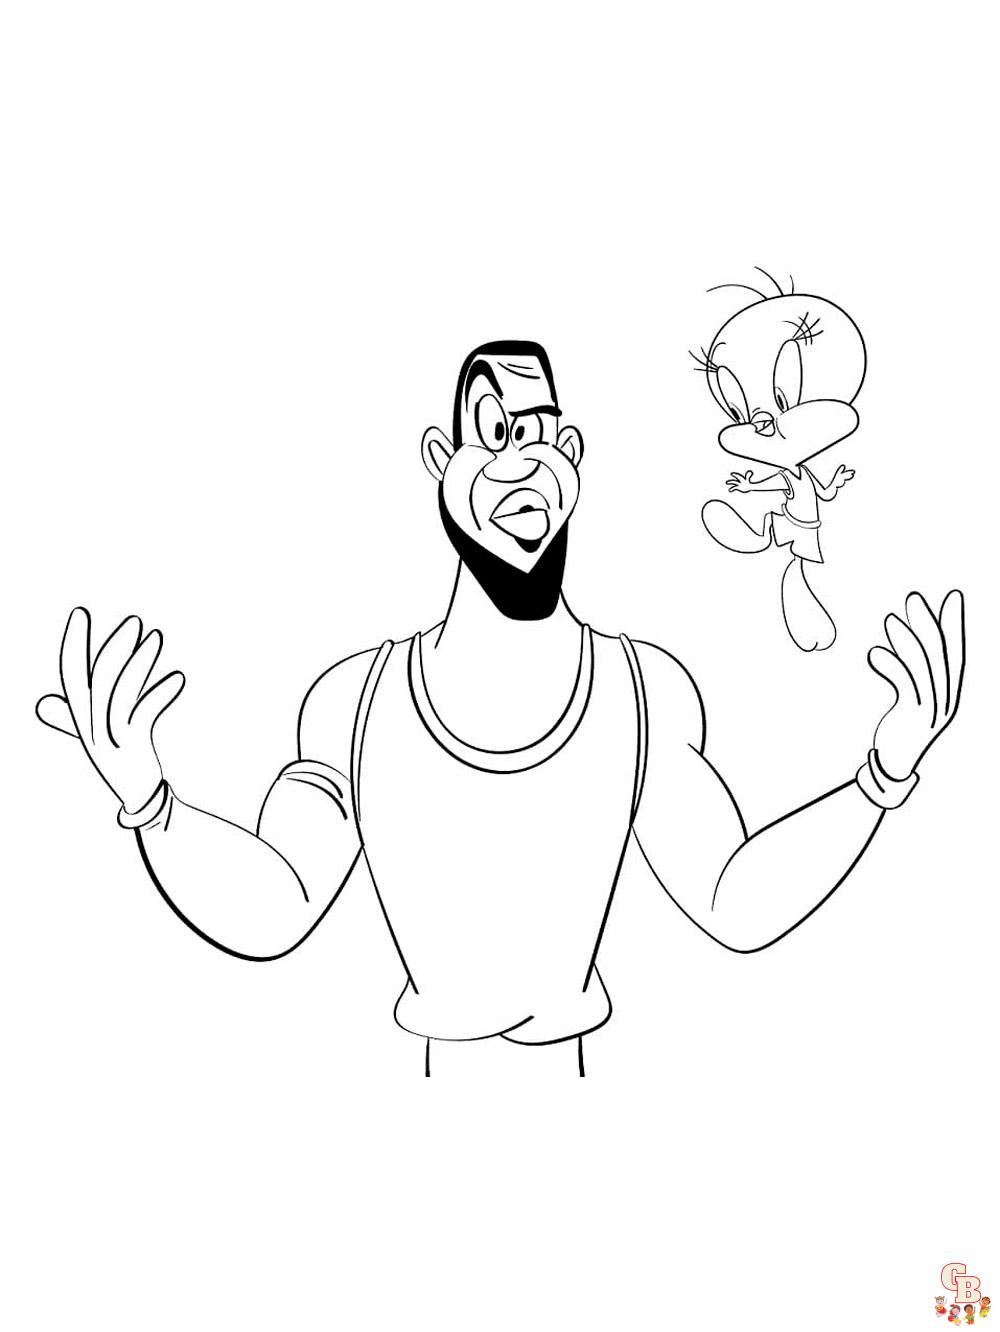 LeBron James coloring page  Free Printable Coloring Pages